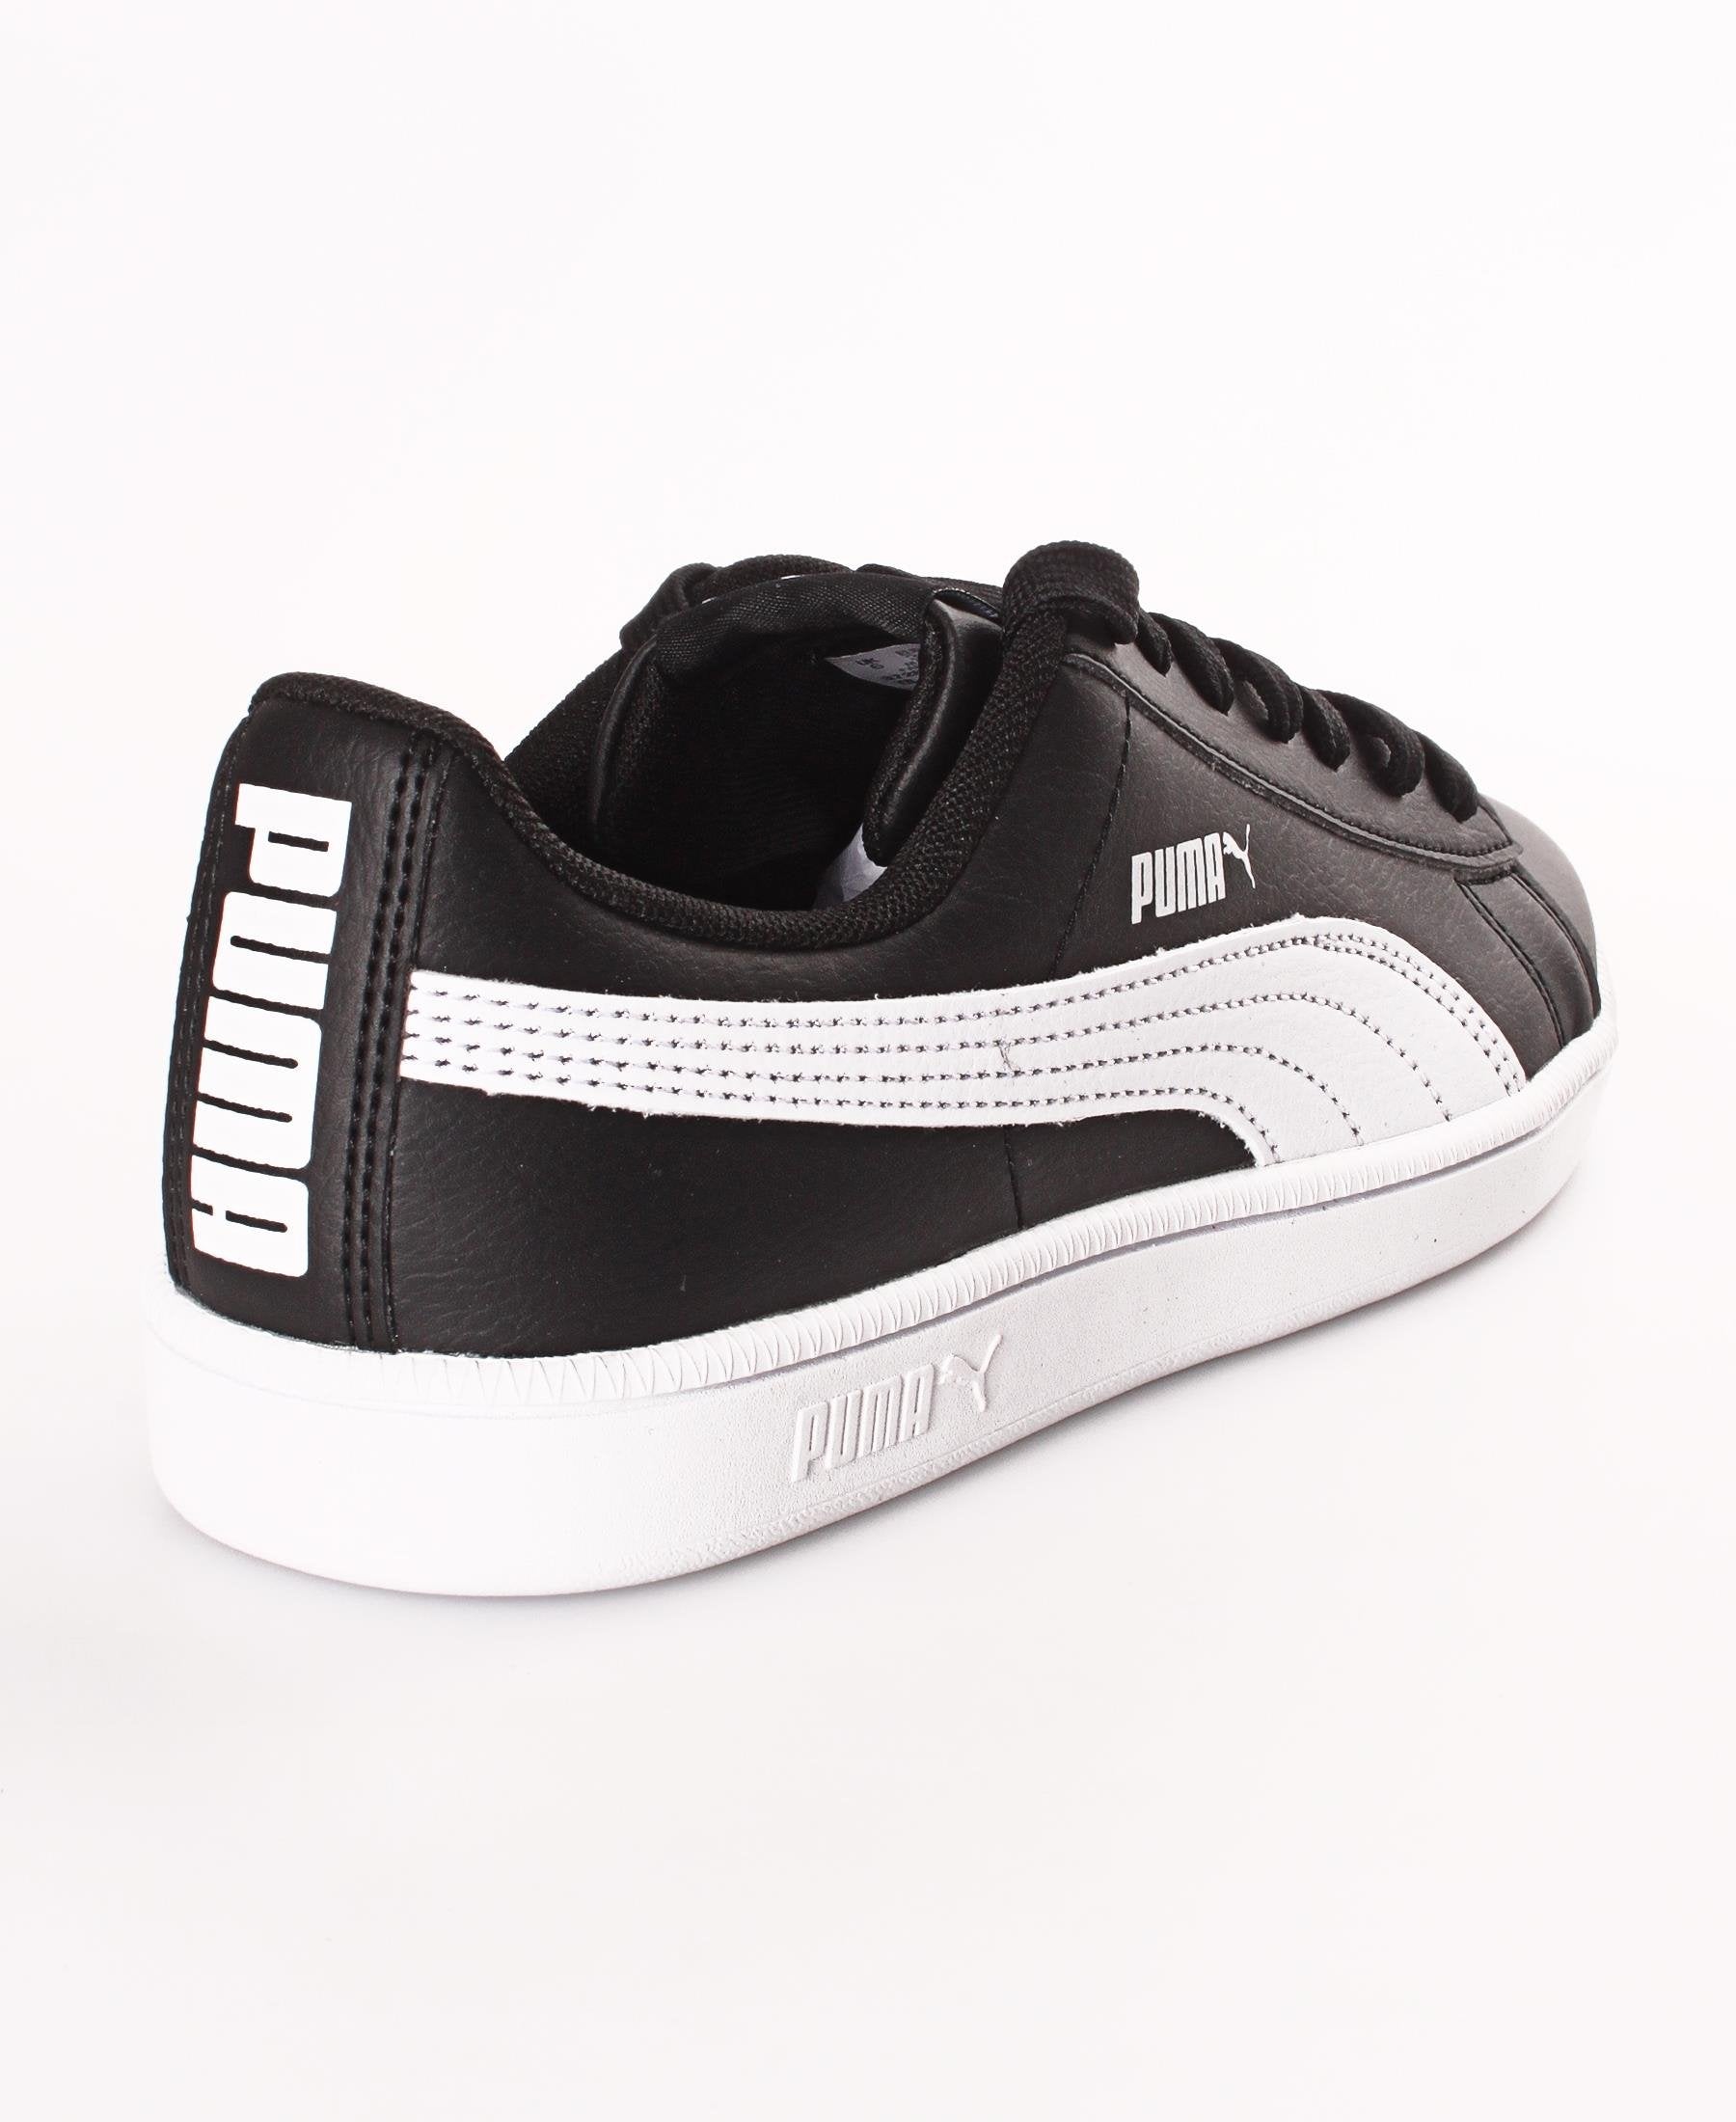 puma wedge sneakers south africa